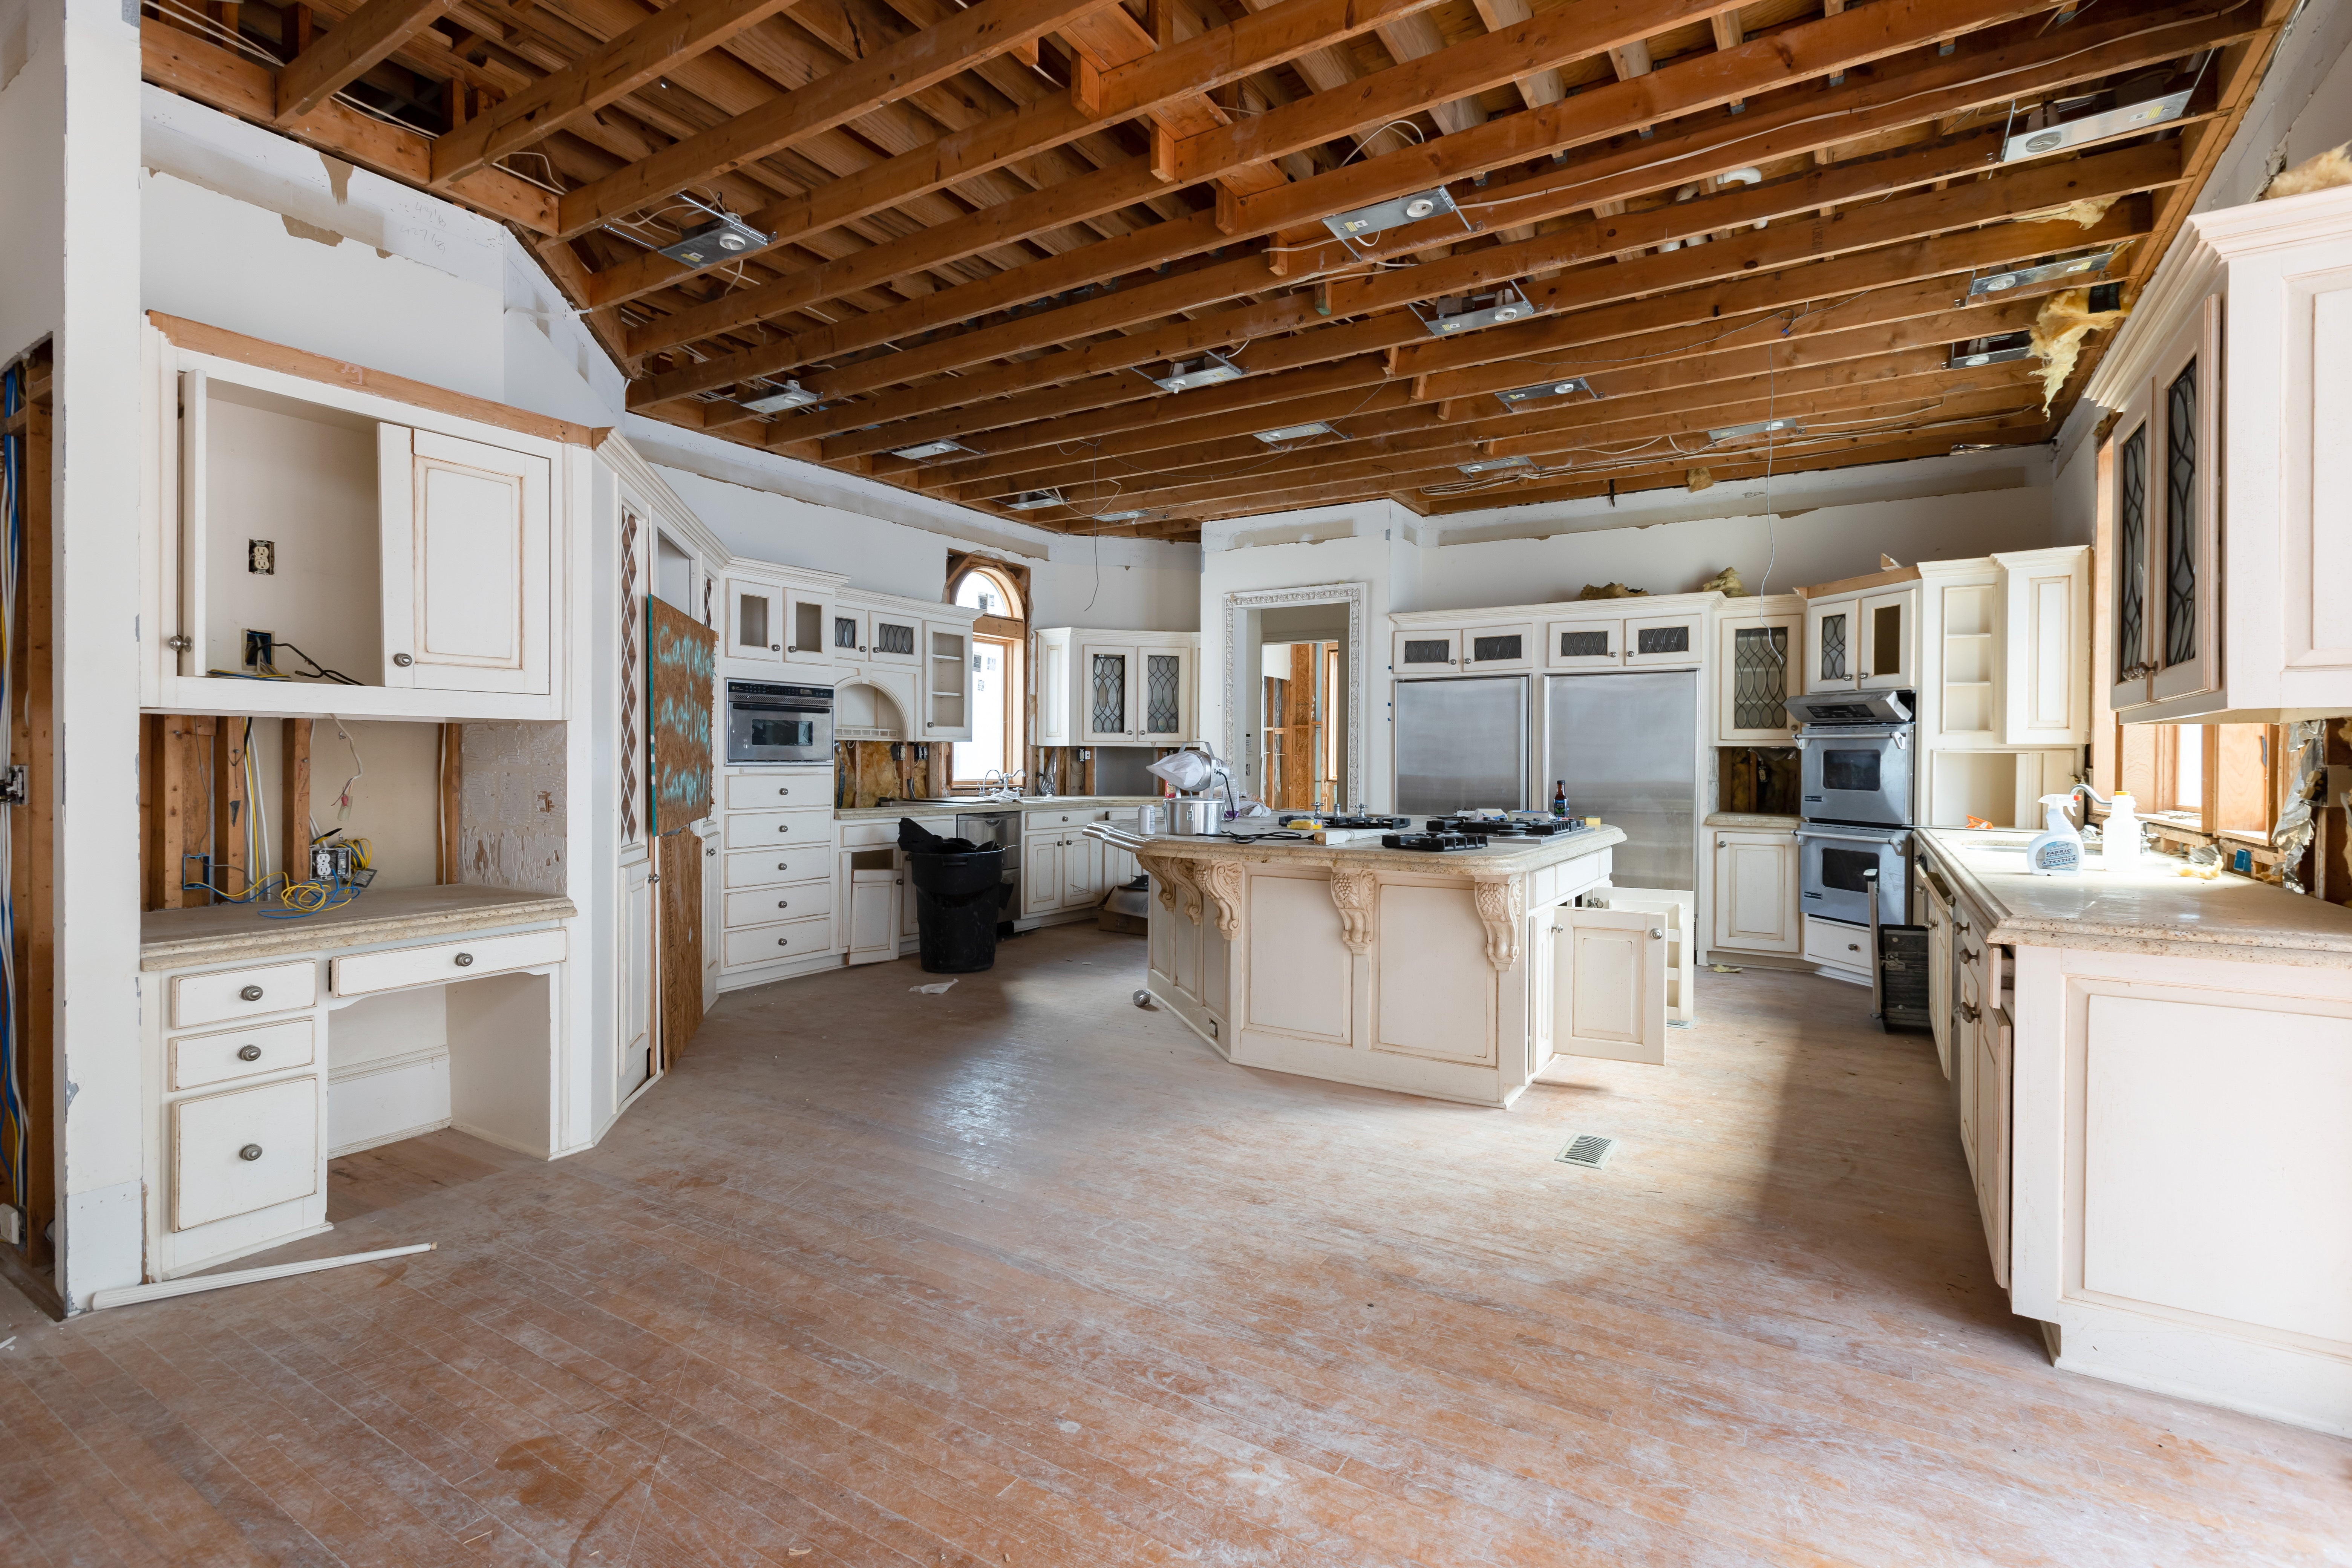 The kitchen of Diddy’s former Atlanta home